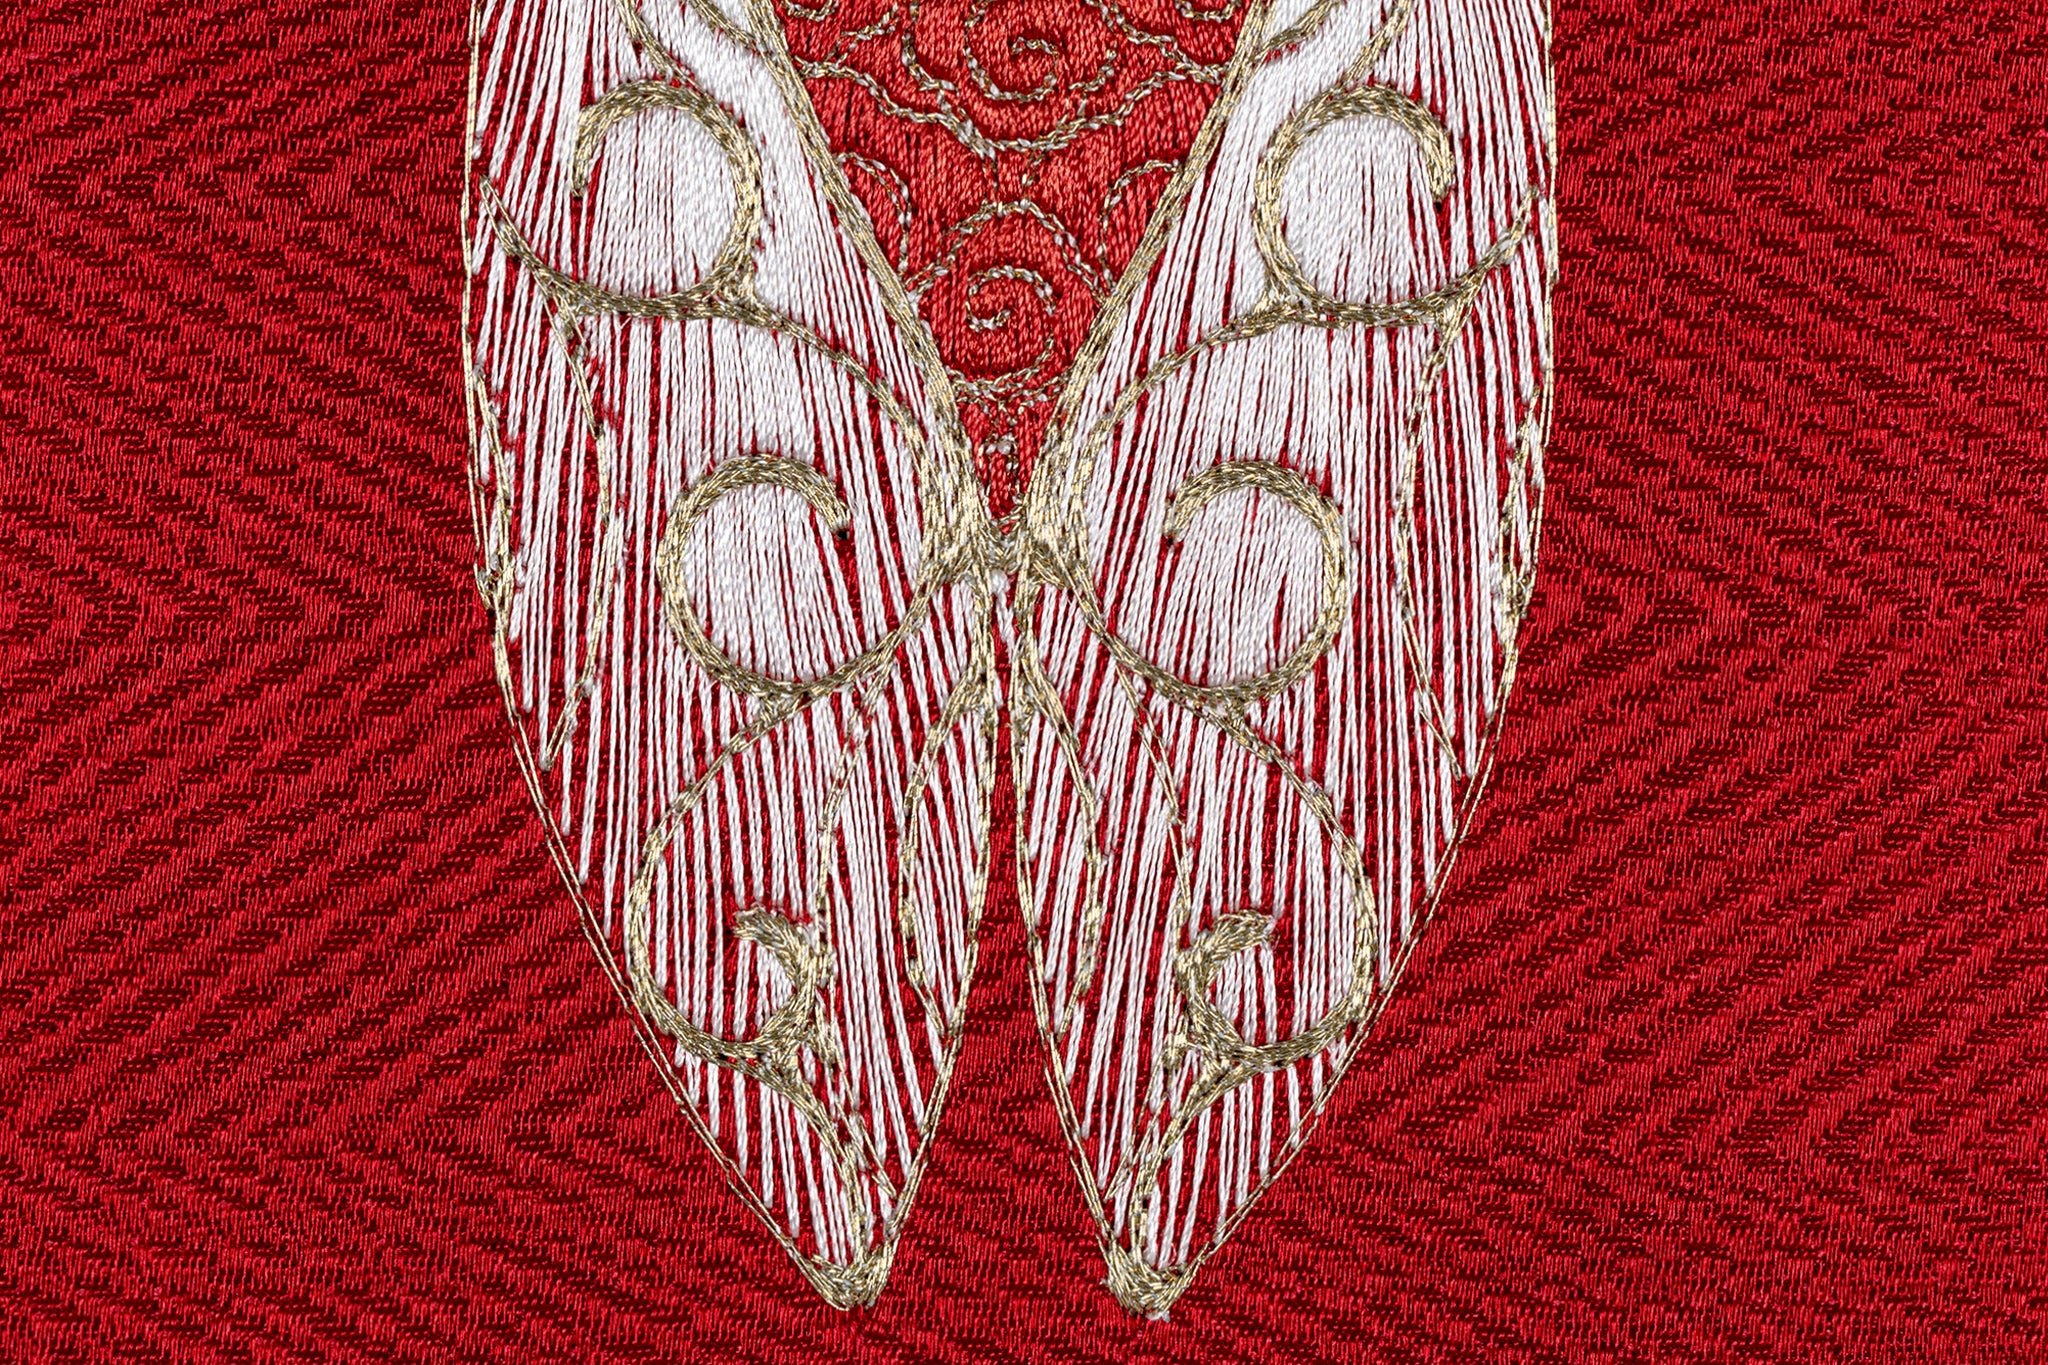 Wing detail on cicada embroidery artwork.